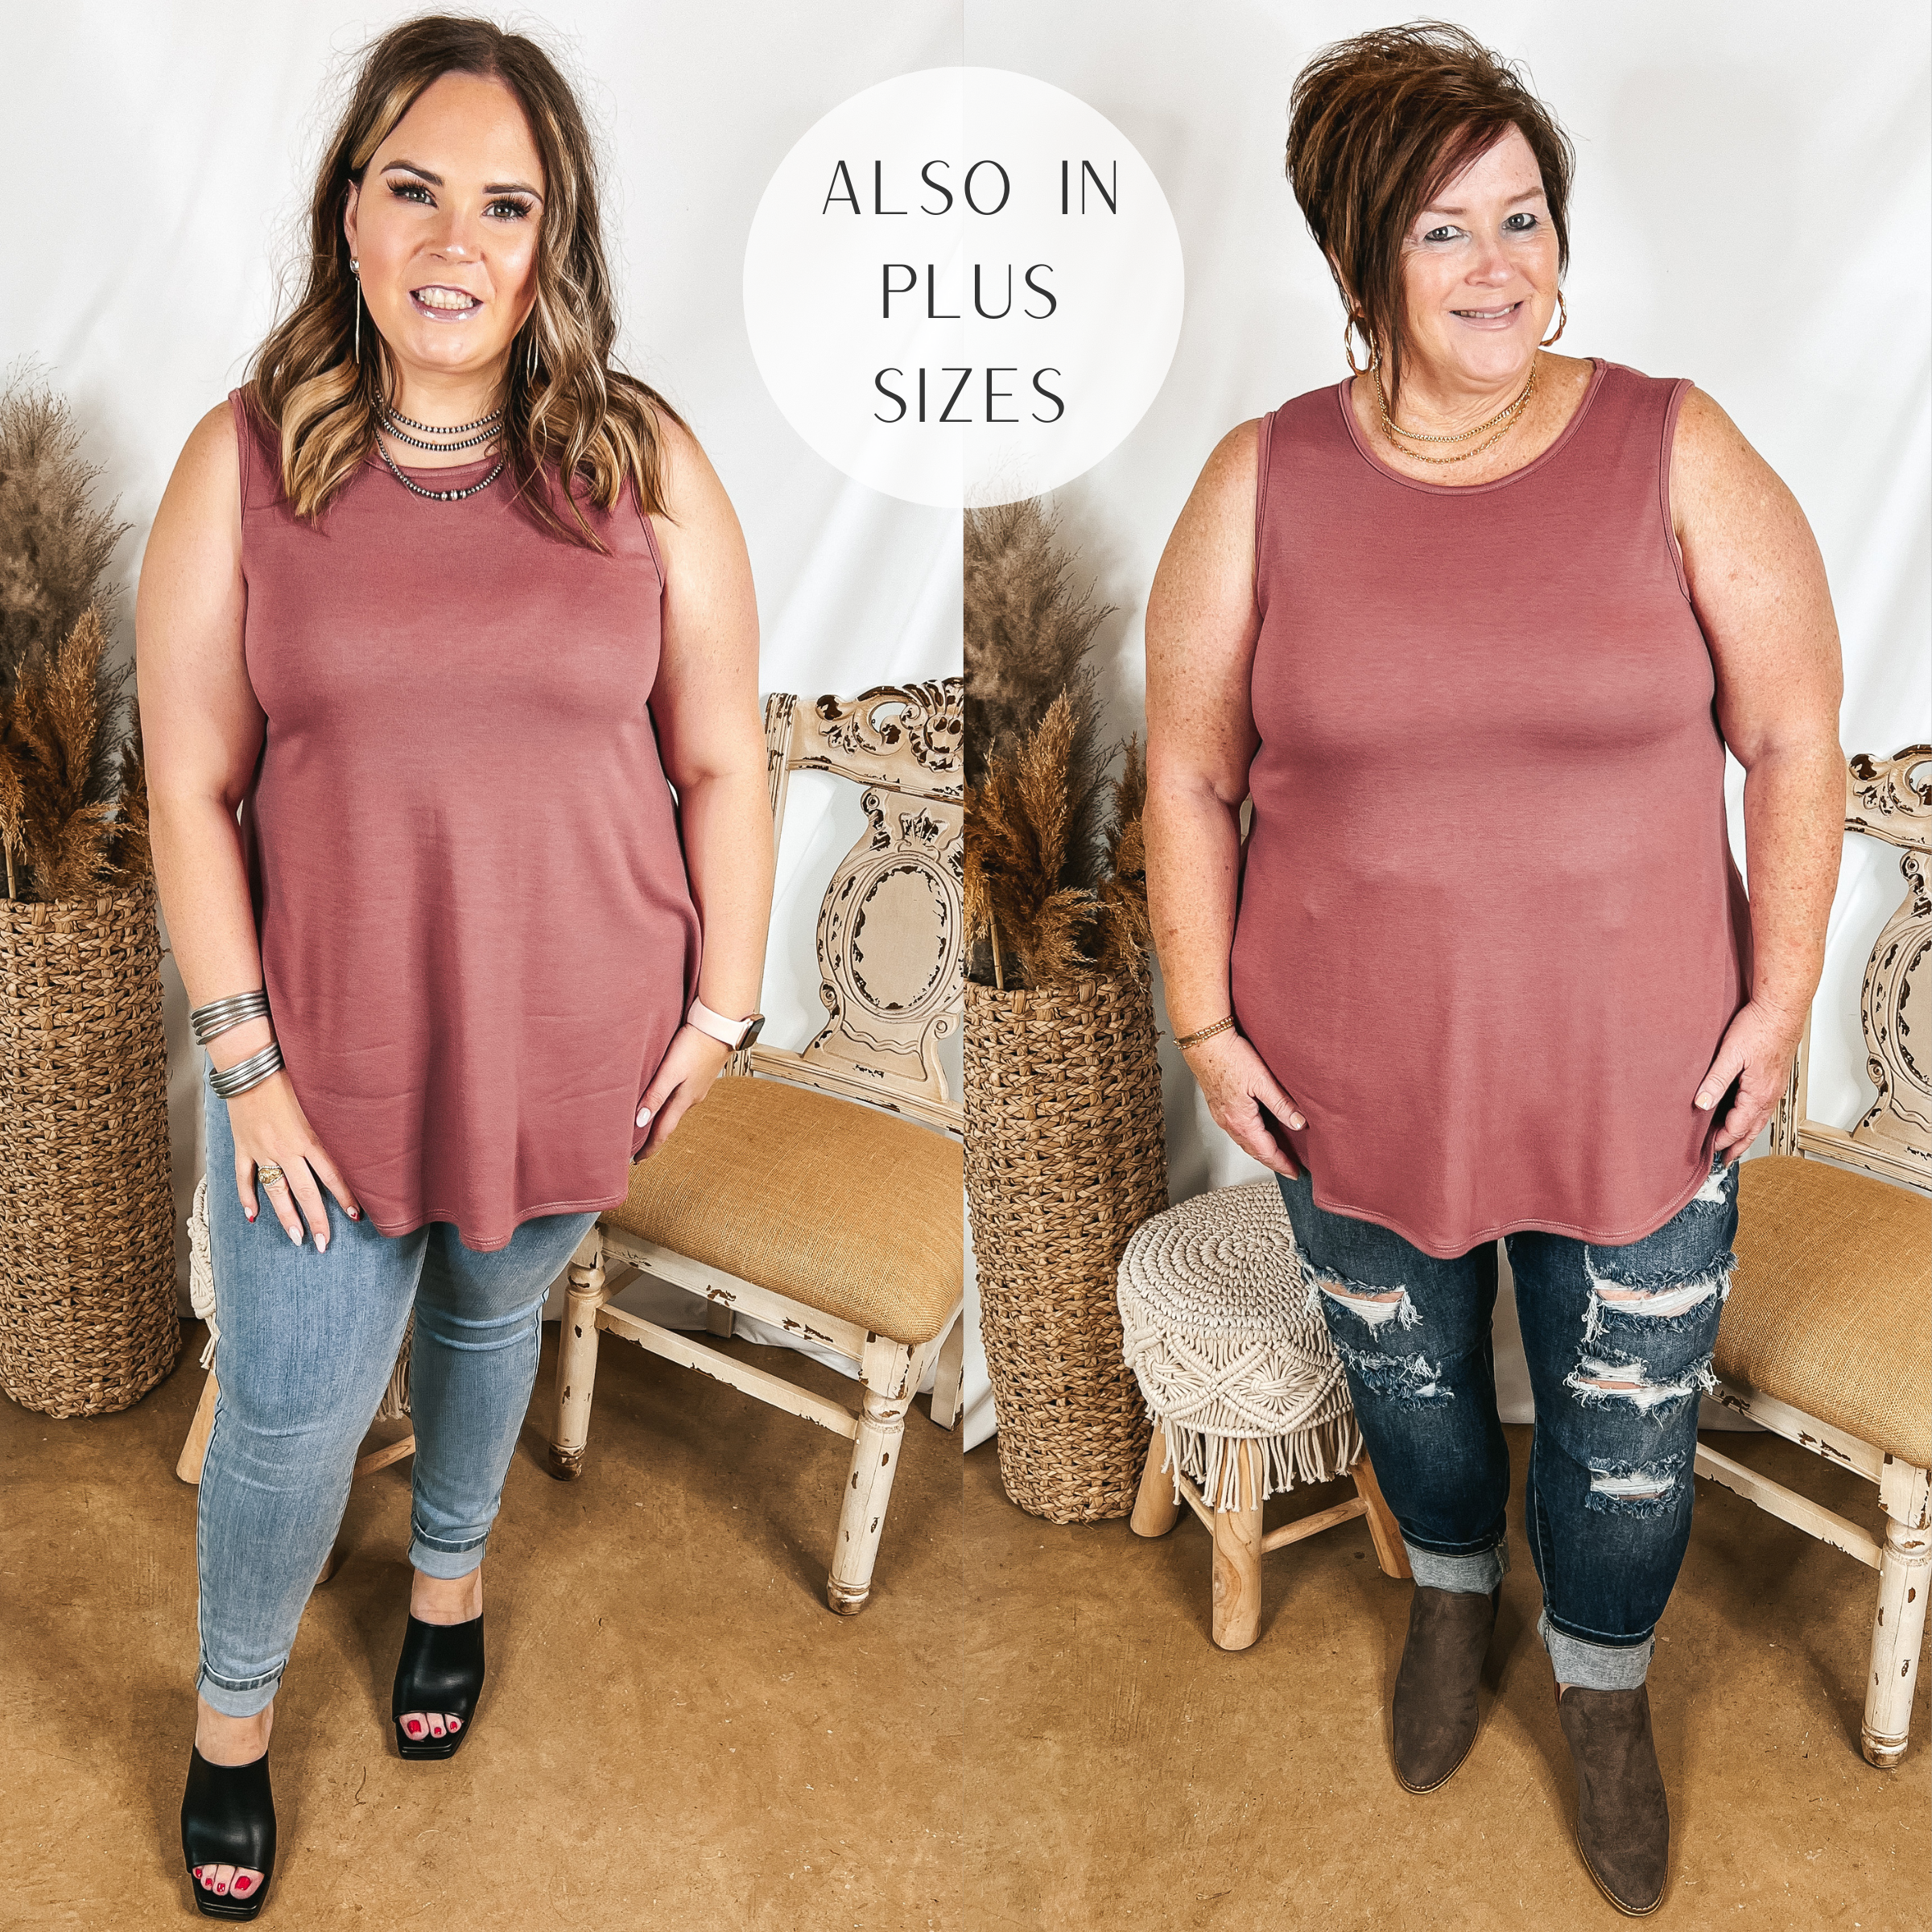 Models are wearing a mauve tank top. Size large model has it paired with jeggings, black heels, and silver jewelry. Plus size model has it paired with distressed boyfriend jeans, brown booties, and gold jewelry.